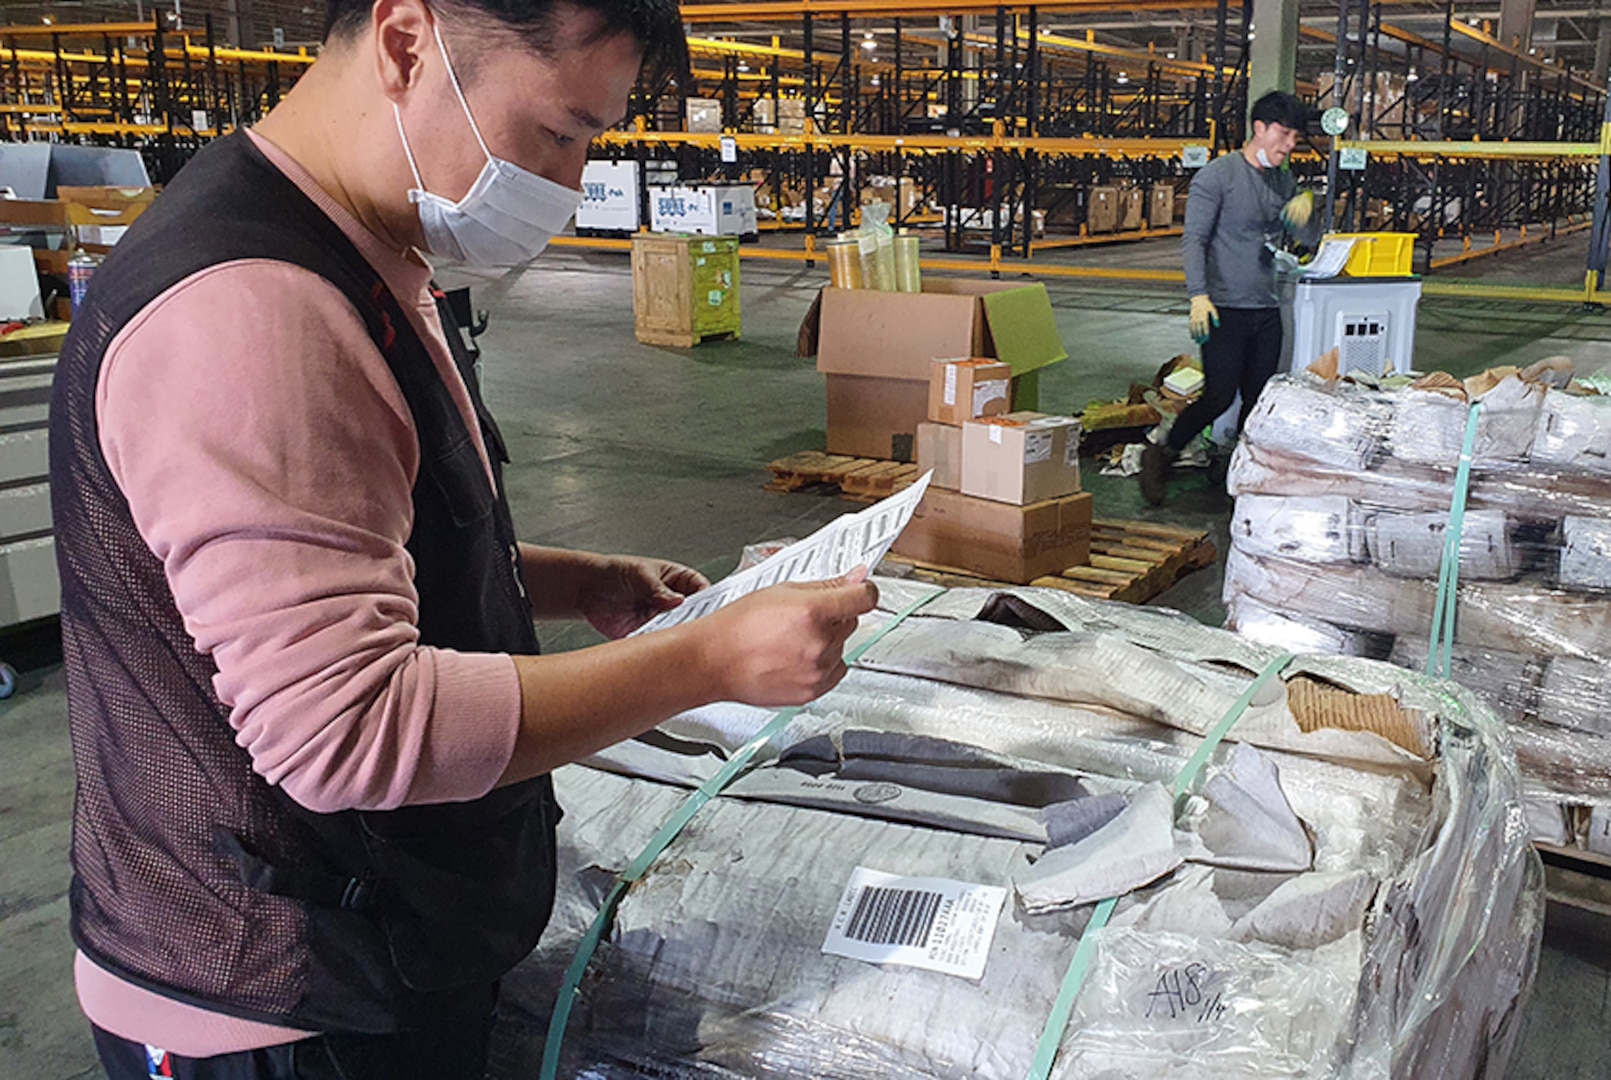 A material examiner looks over paperwork in a warehouse.